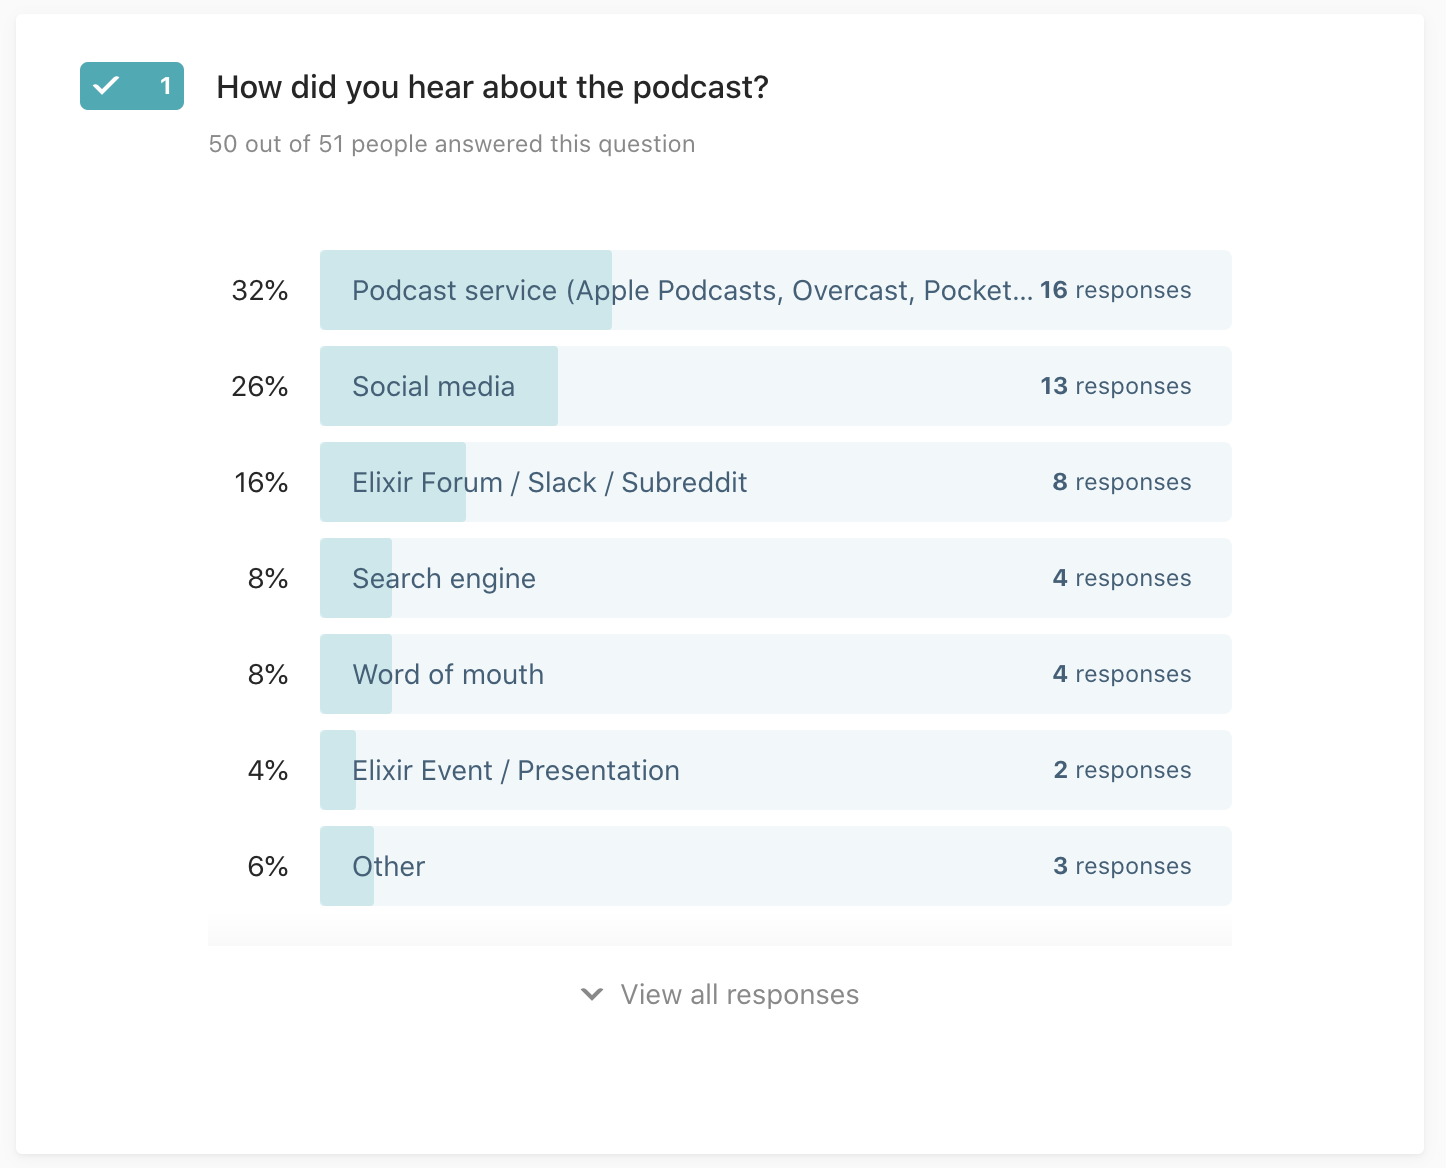 Picture of a survey question "How did you hear about the podcast?" with responses: 33% podcast service, 26% social media, 16% Elixir forum/slack/subreddit, 8% search engine, 8% word of mouth